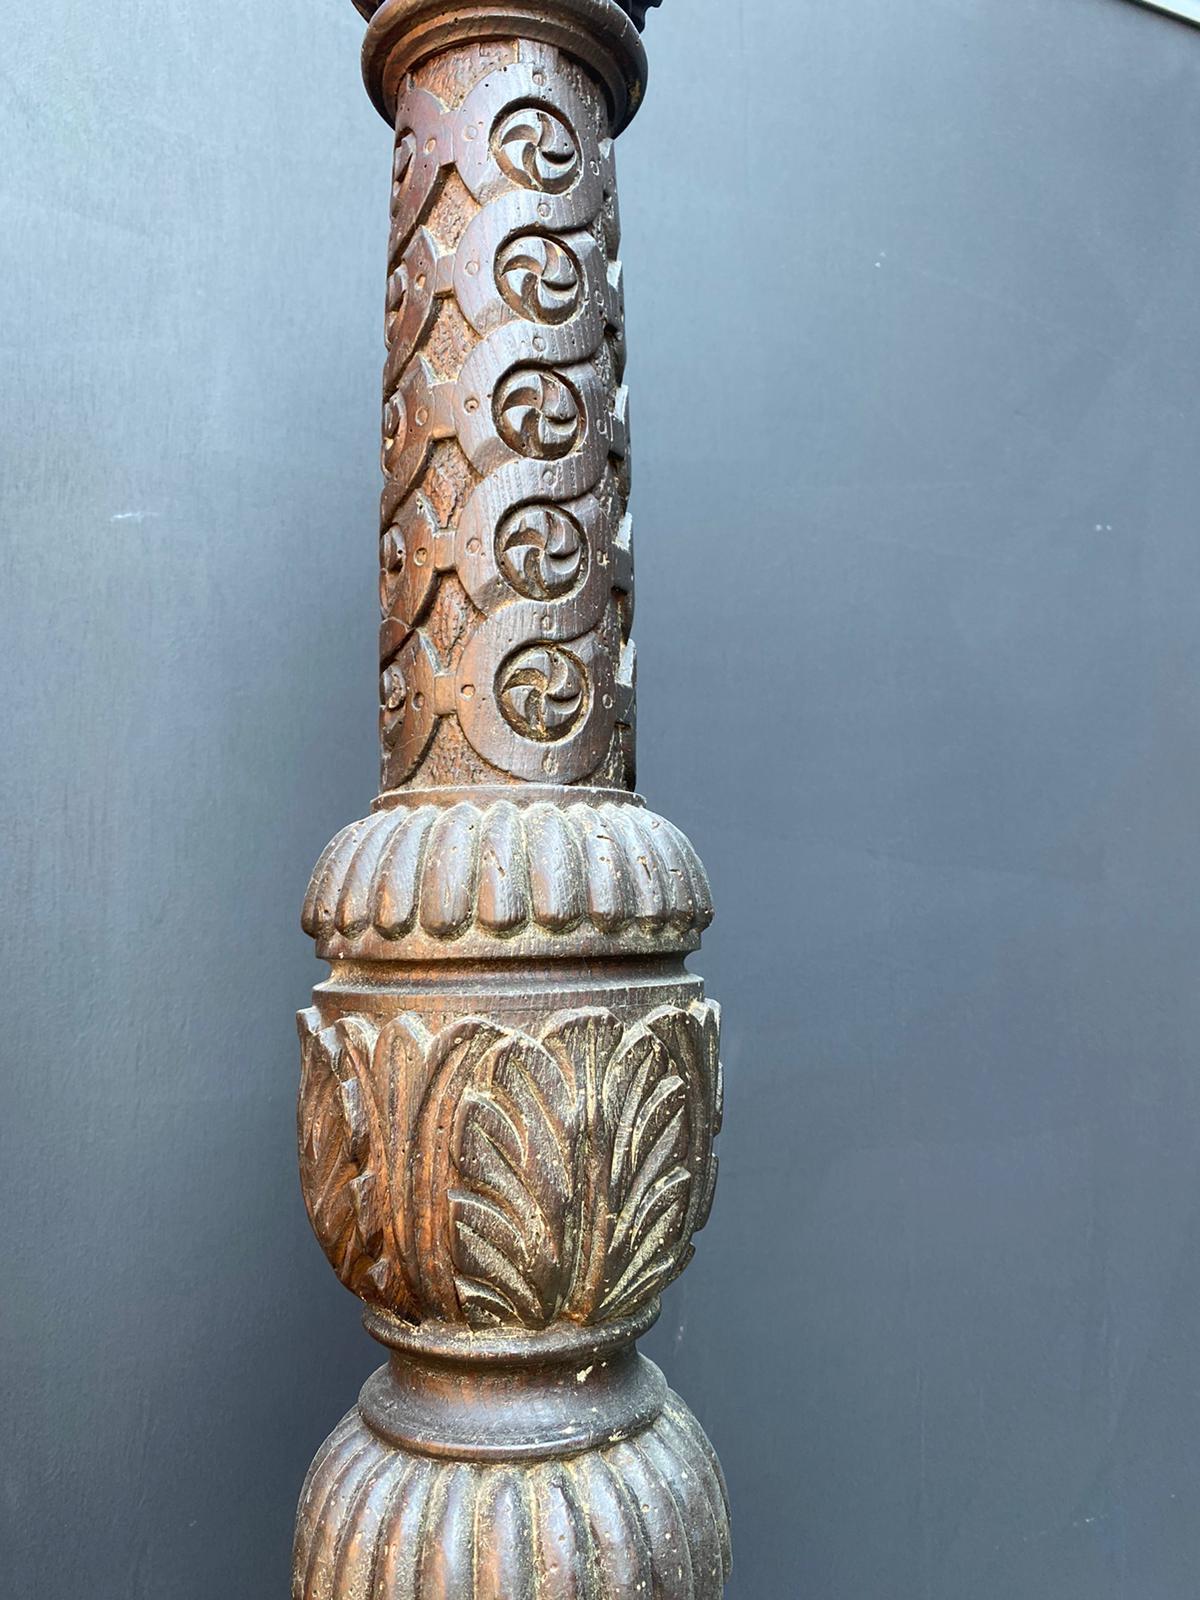 These beautiful mid 16th century English carved oak columns are steeped in history. Ornately hand carved, these wooden columns date back more than 470 years, offering a unique glimpse into the craftsmanship of 16th century England! Each stands at